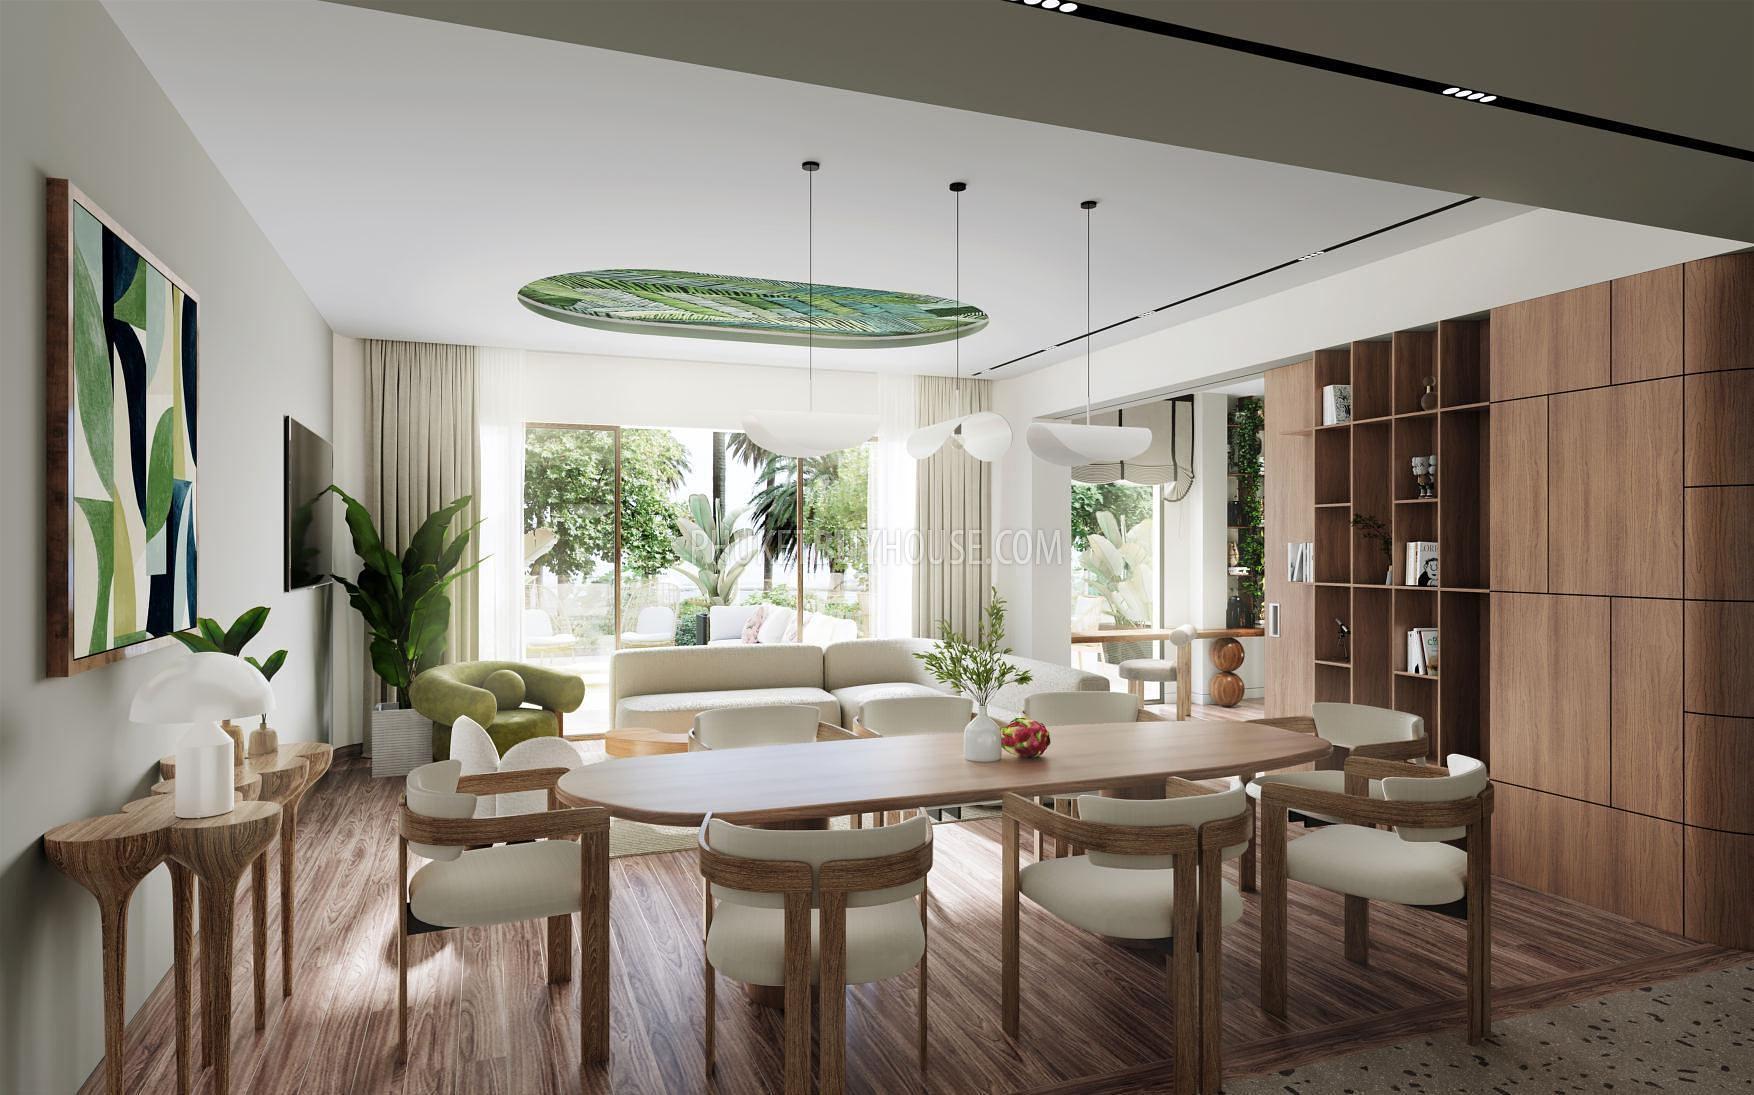 LAY22053: Layan's Self-Sufficient Mini-City: Four Bedroom Luxury Apartment For Sale. Photo #4